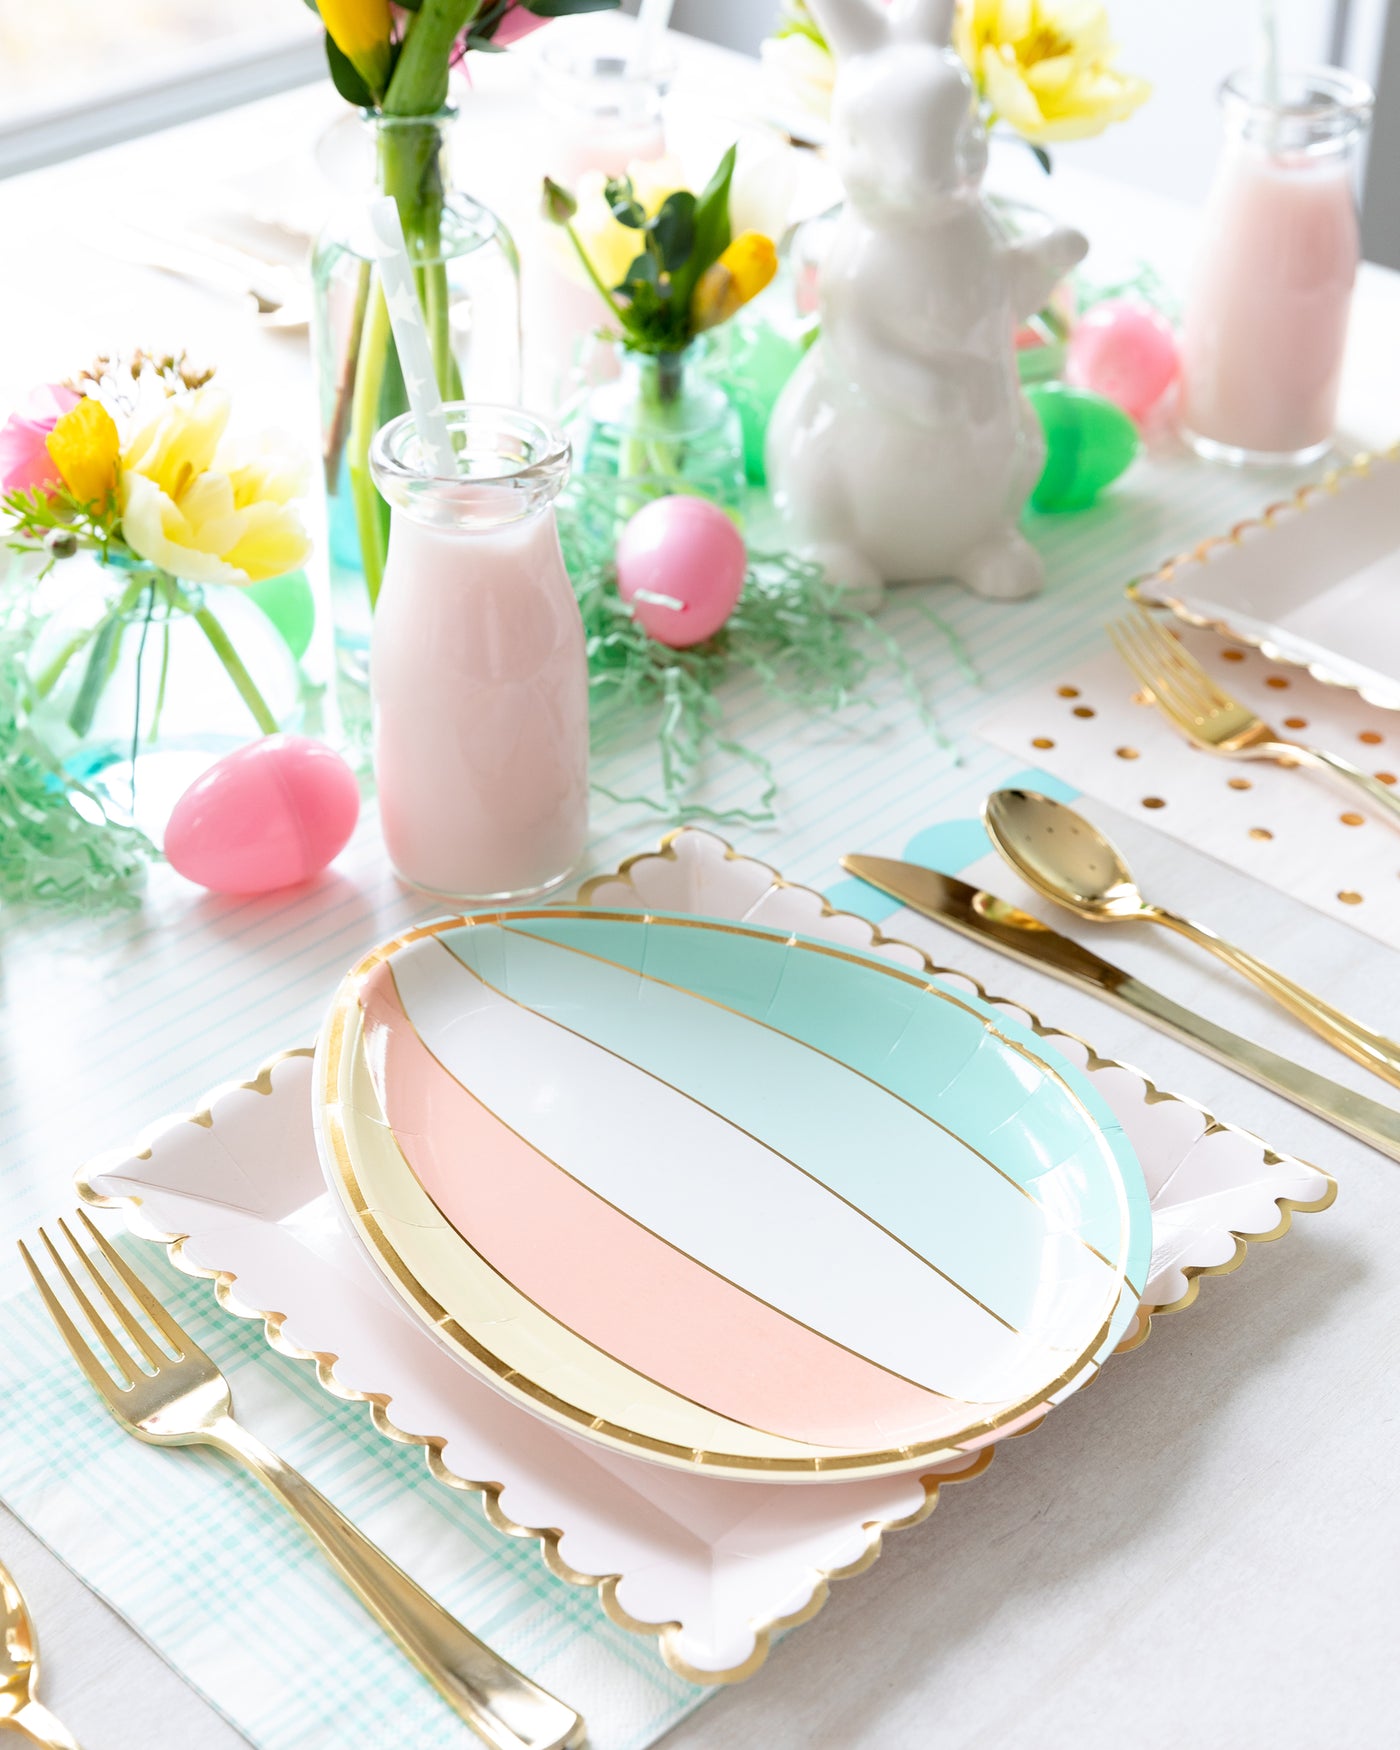 Happy Easter Egg Shaped Paper Plates